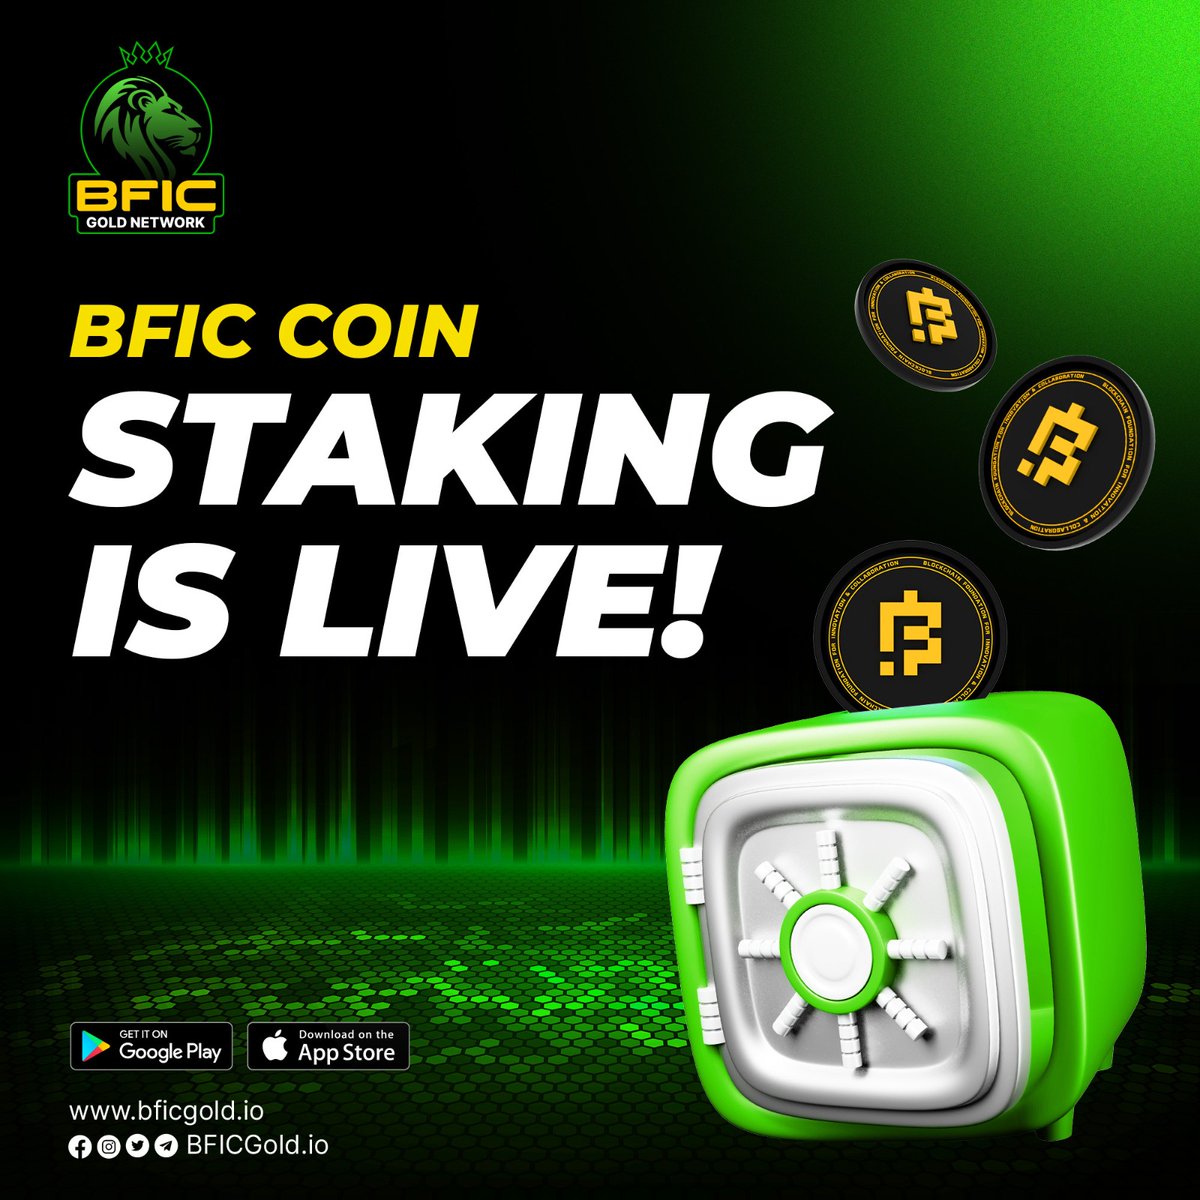 Exciting Update for BFIC Community Members! 🔥

BFIC Coin staking is now live on the BFIC Gold Network! 

#BFICGoldNetworkCommunity #BFIC #BFICCoin #BFICCommunity #TotheFuture #ToTheMoon #BFICNetworkisBack #Staking #EarnMoneyfromHome #EarnOnline #EarnfromPhone #GoodNews